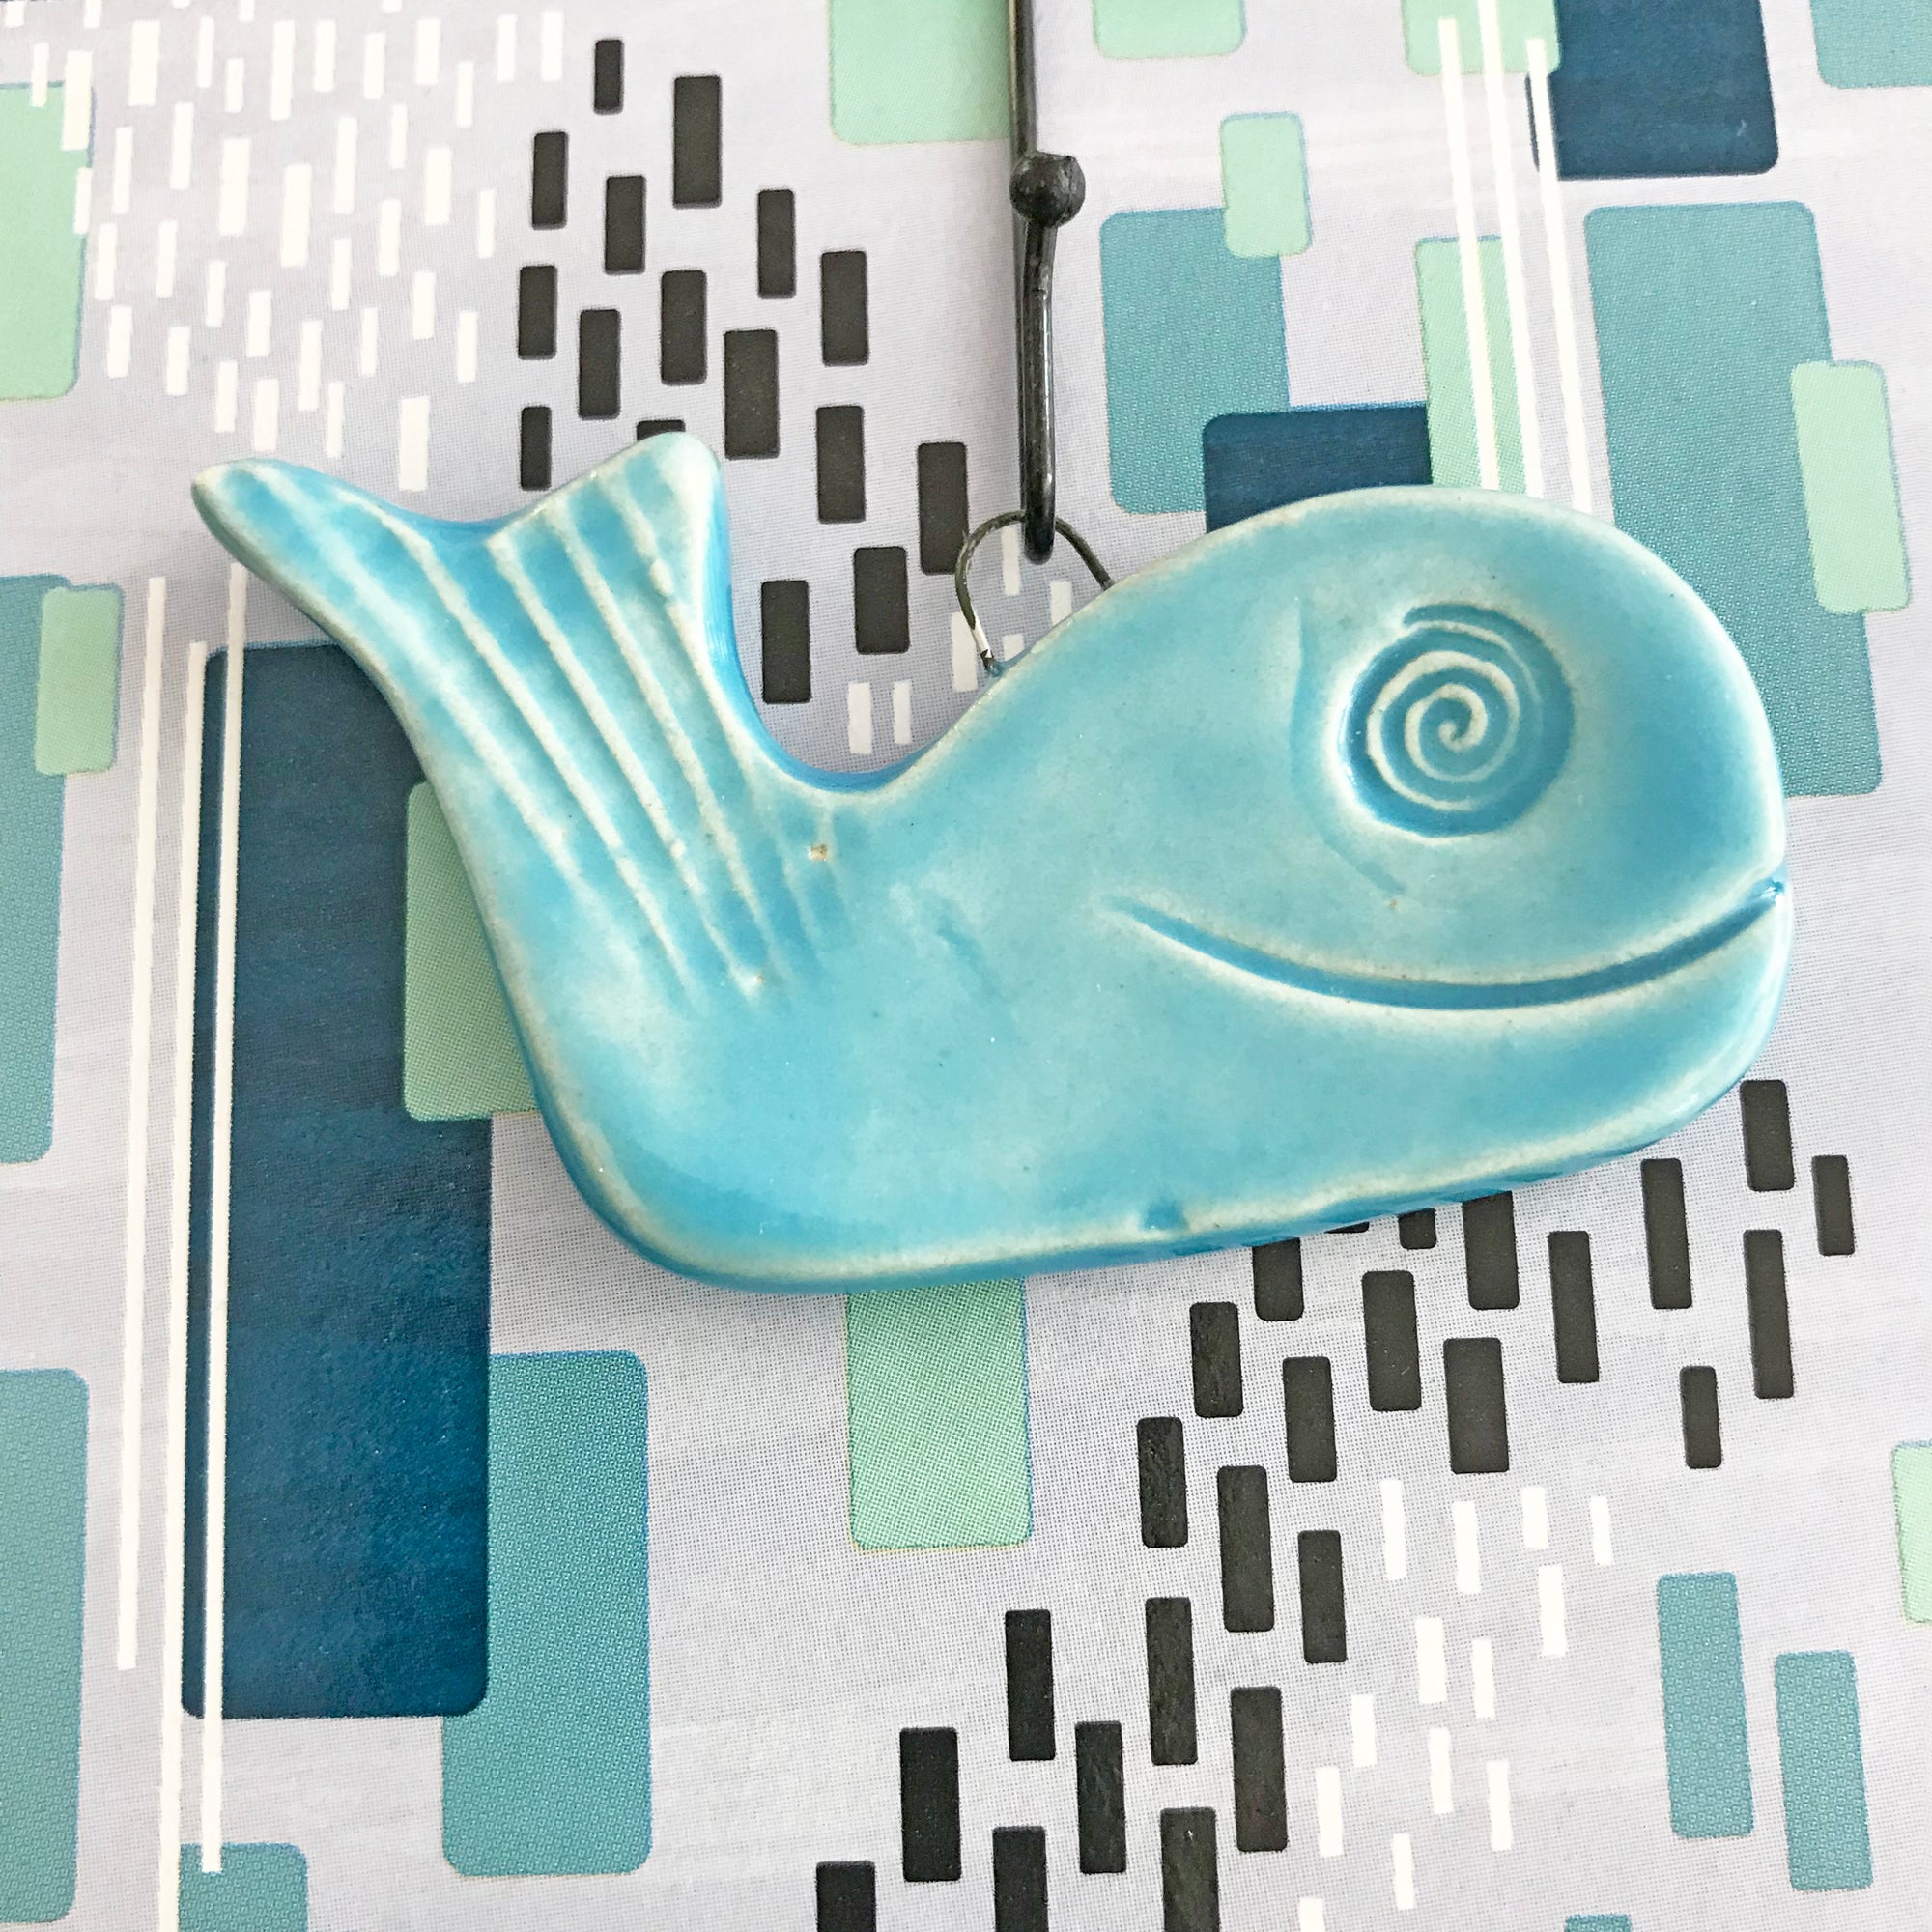 Handmade Whale Ornament glazed in turquoise blue .  Has a big smile and a happy life. 